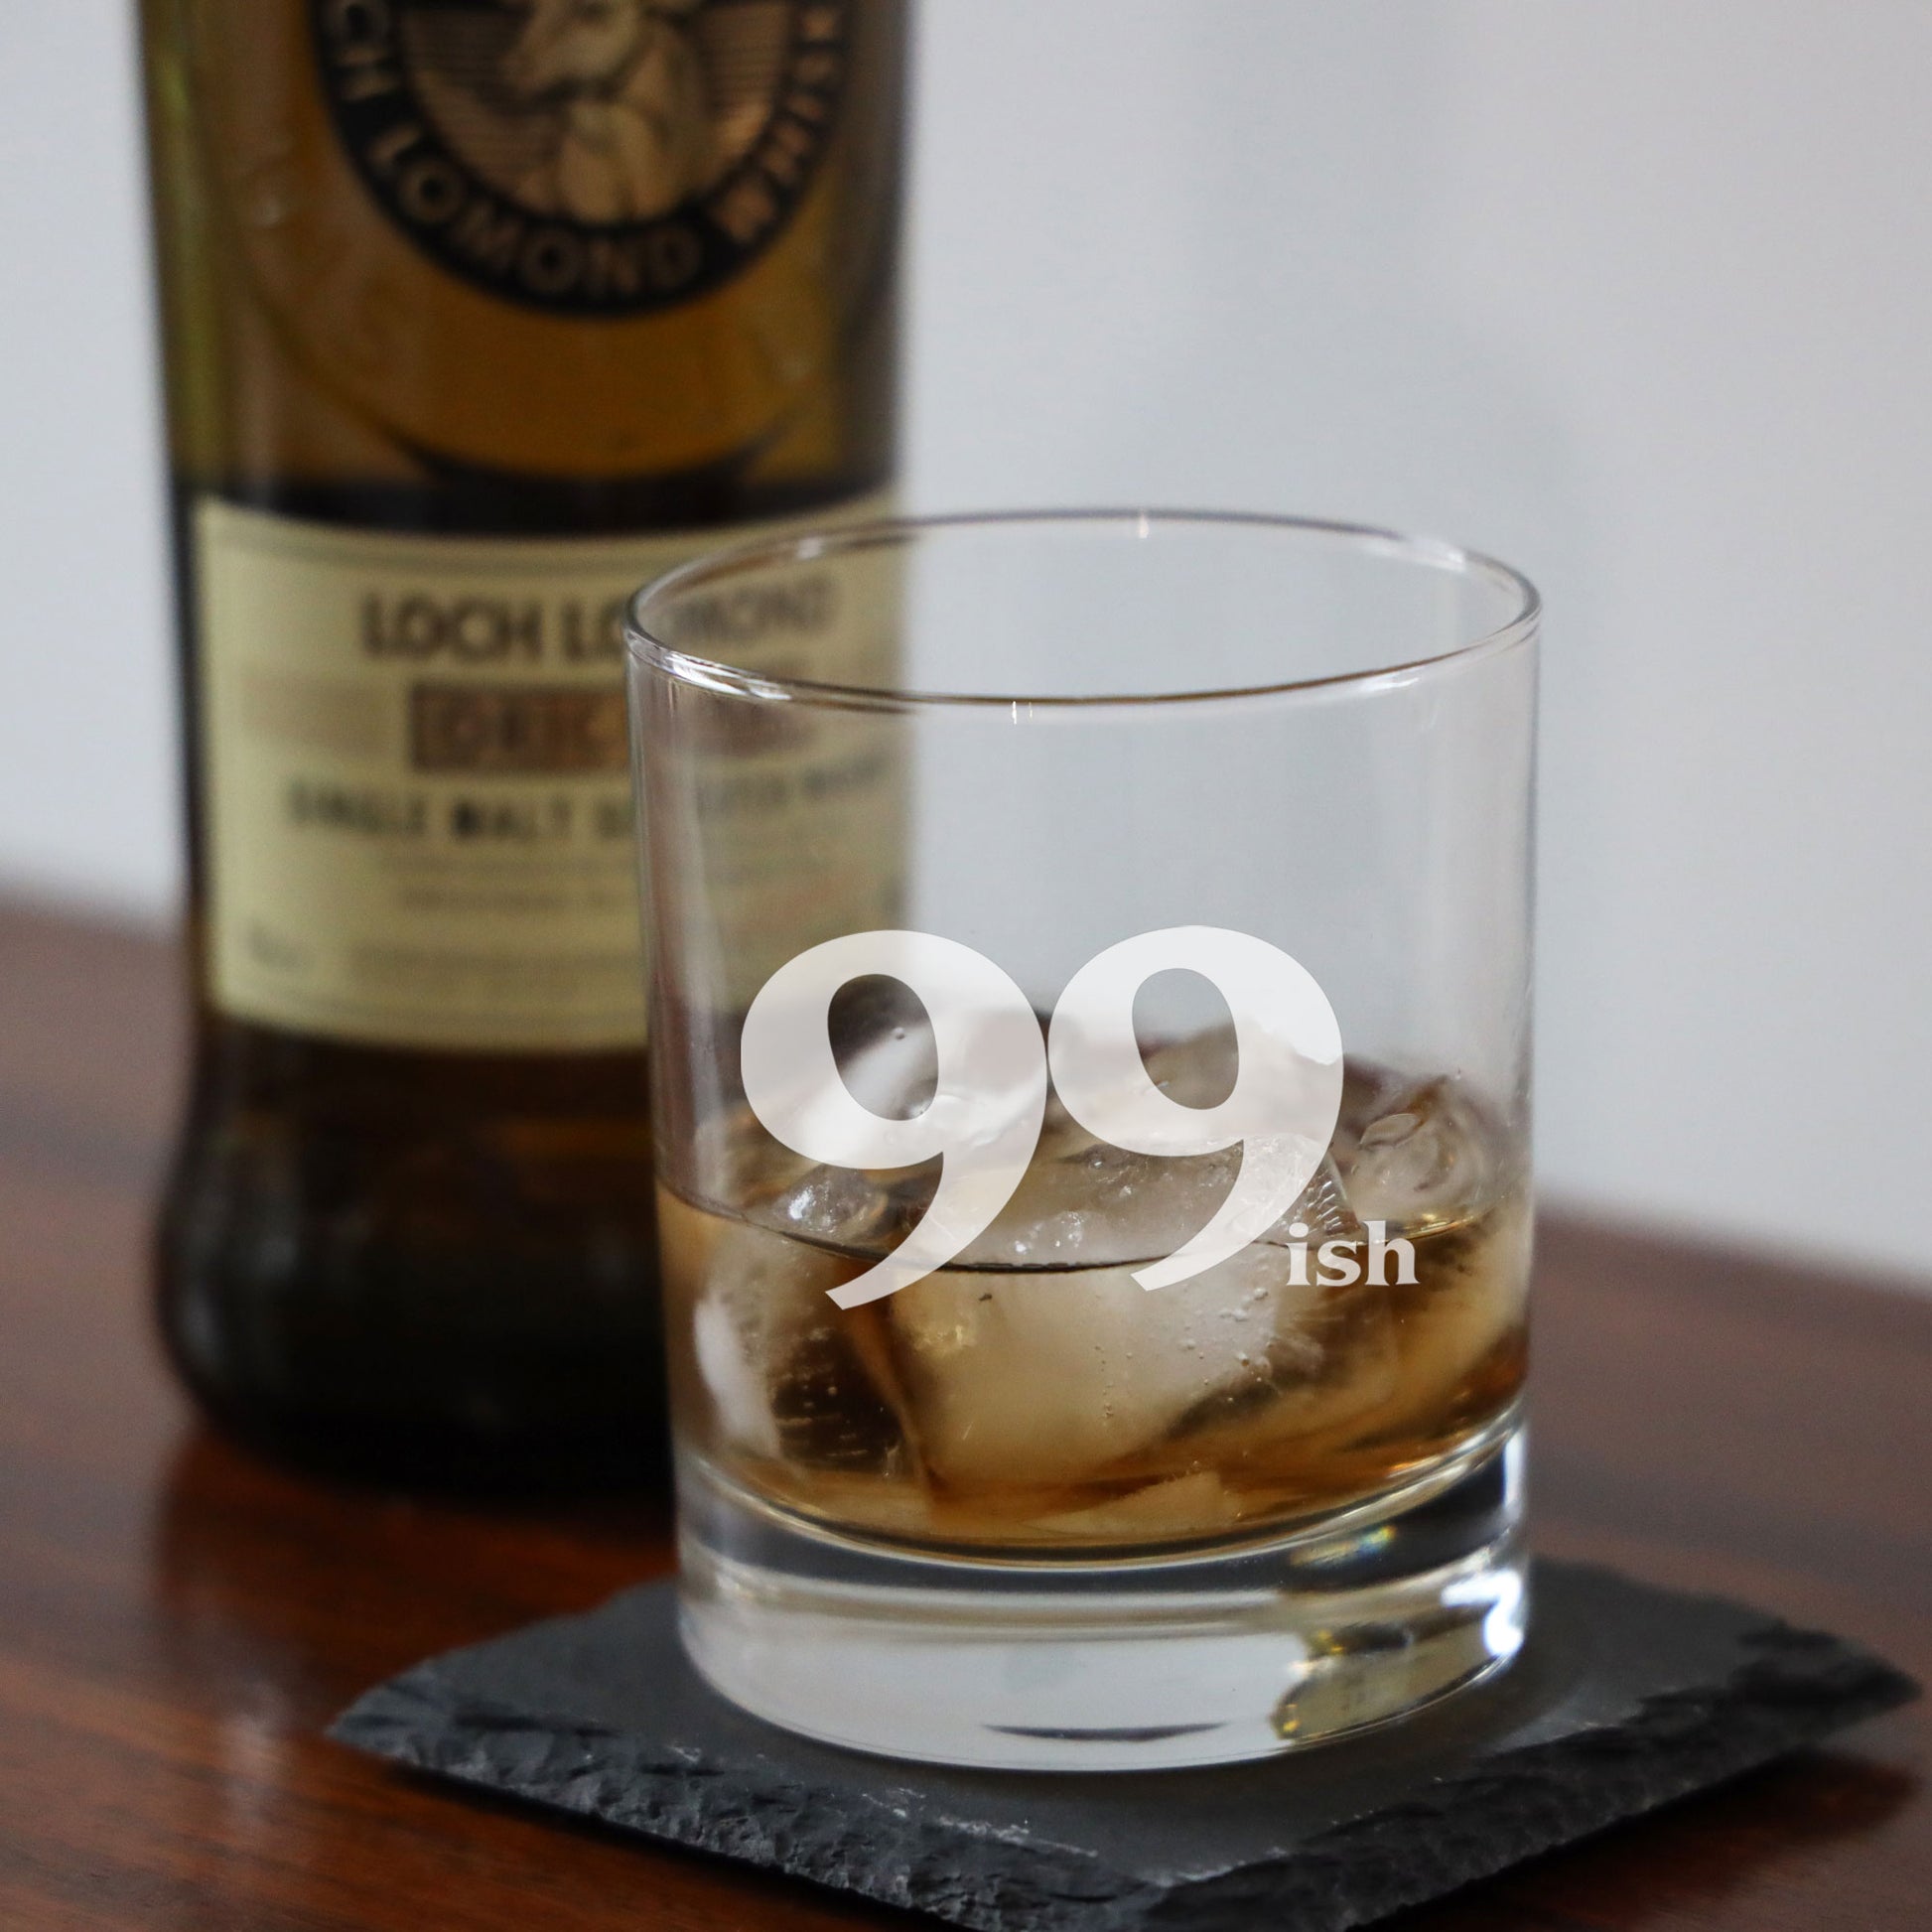 99ish Whisky Glass and/or Coaster Set  - Always Looking Good -   